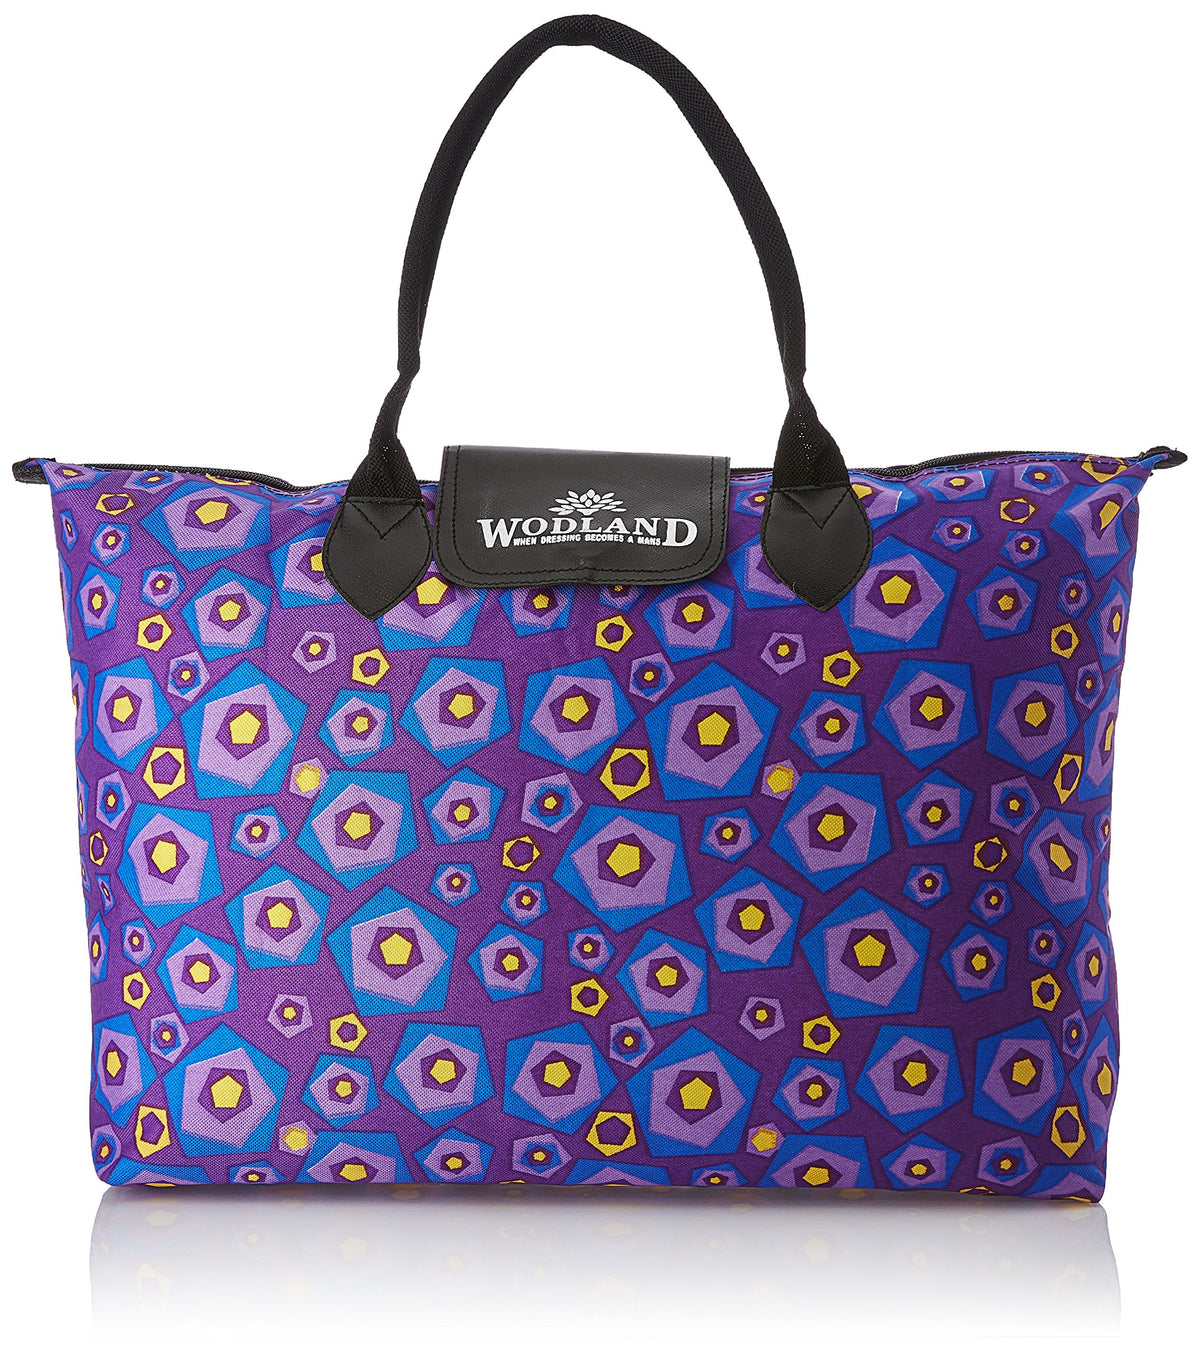 Kuber Industries Fabric 50 cms multicolour Shopping Bag (TRAVEL03159)